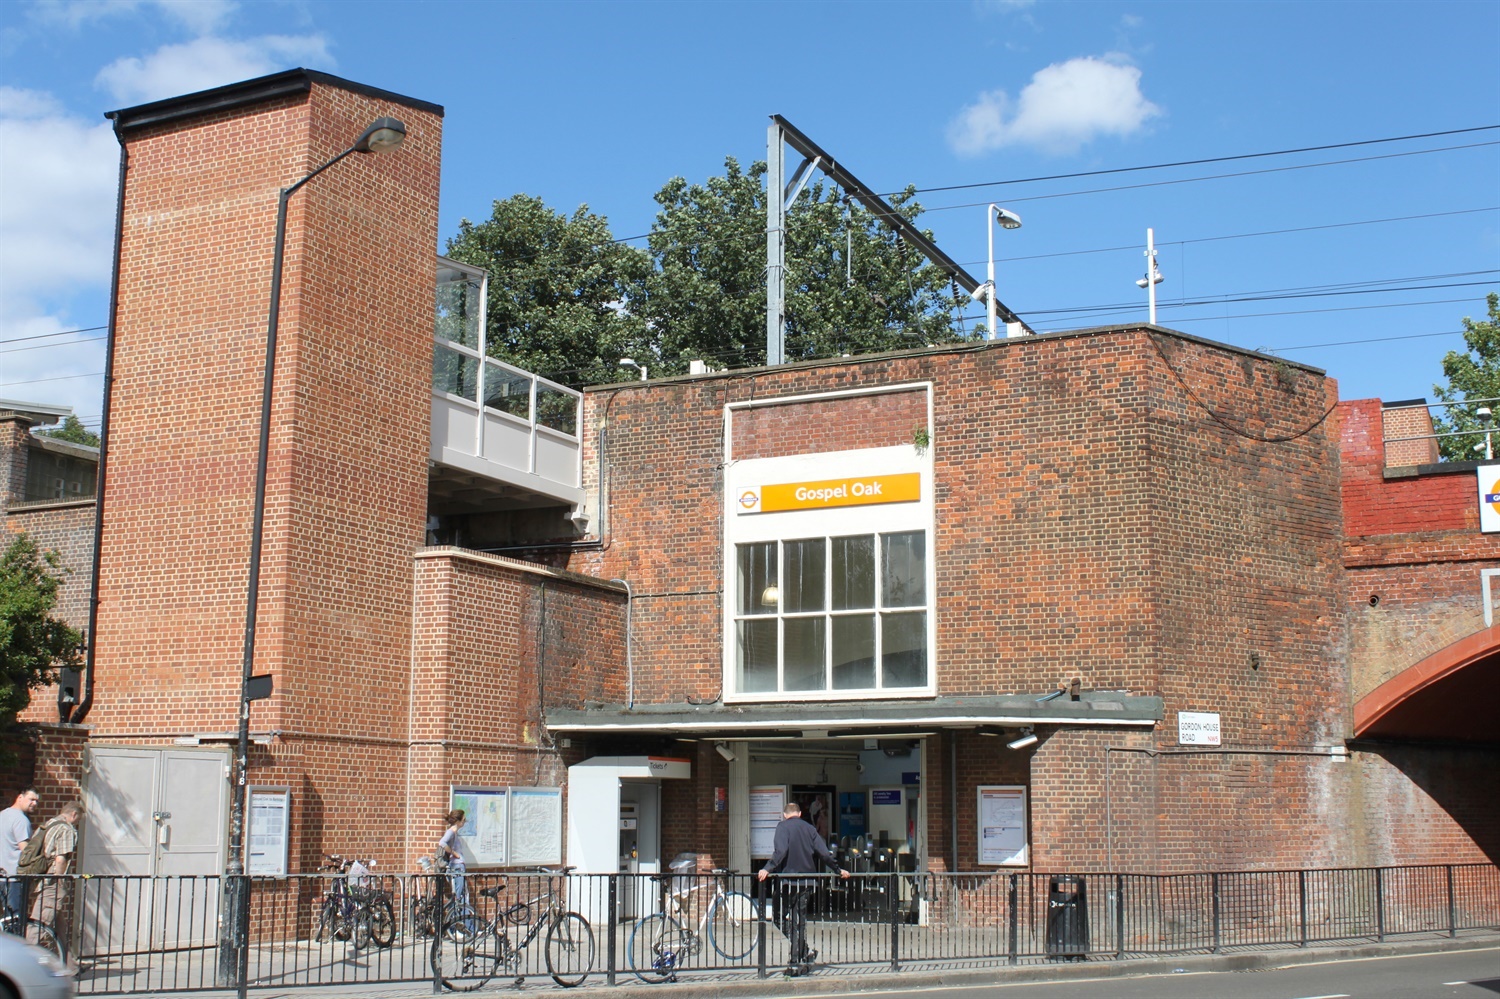 Gospel Oak to Barking Line to close for eight months for electrification upgrades